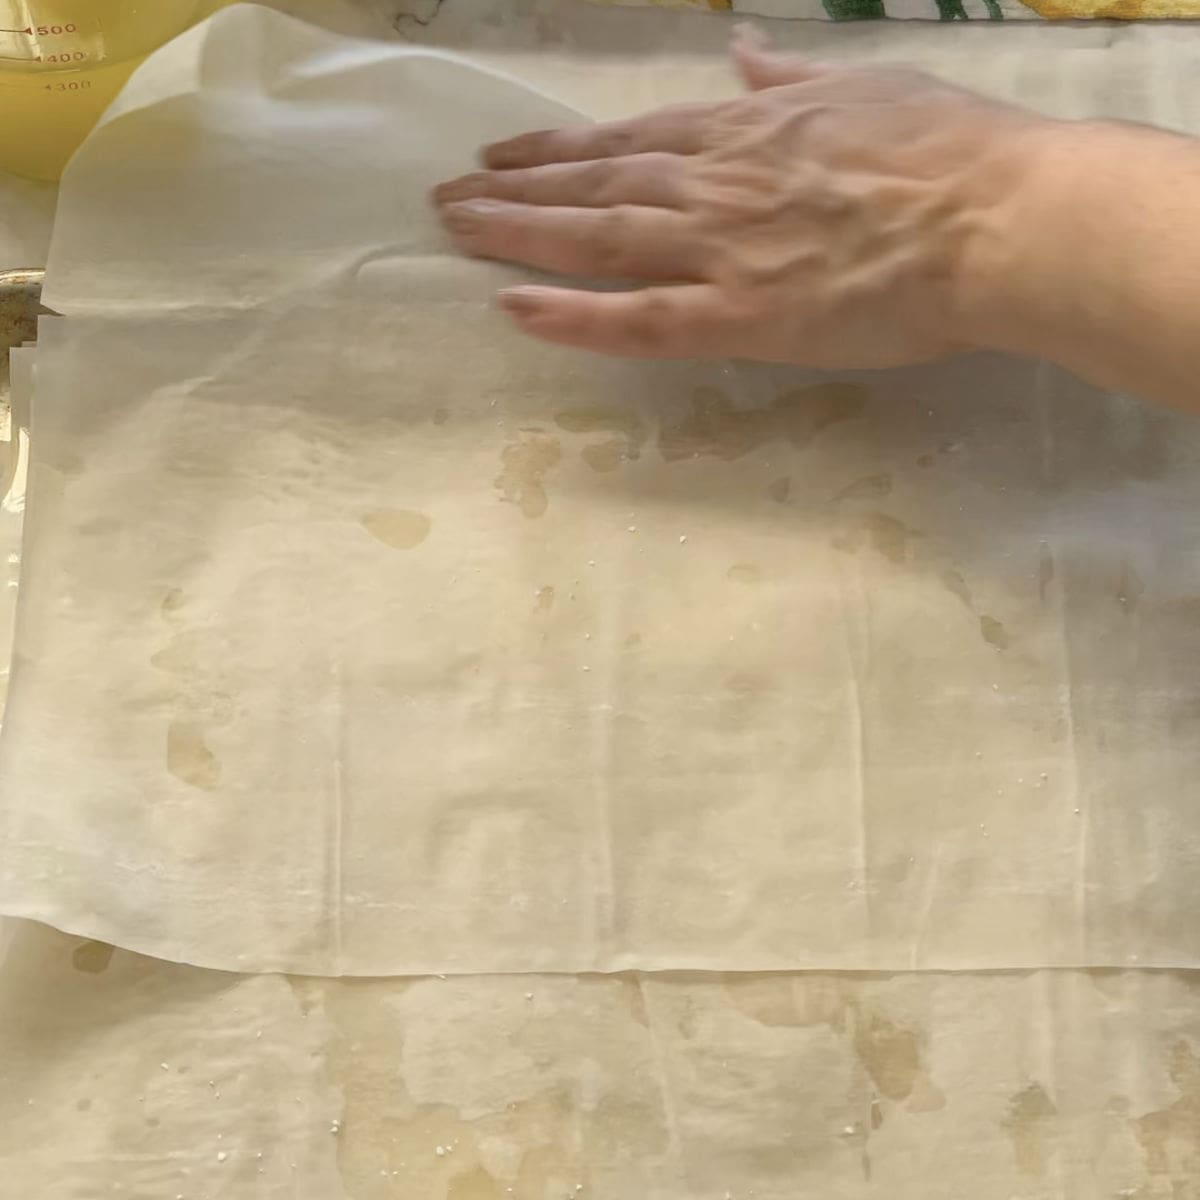 Overlapping the phyllo sheets.